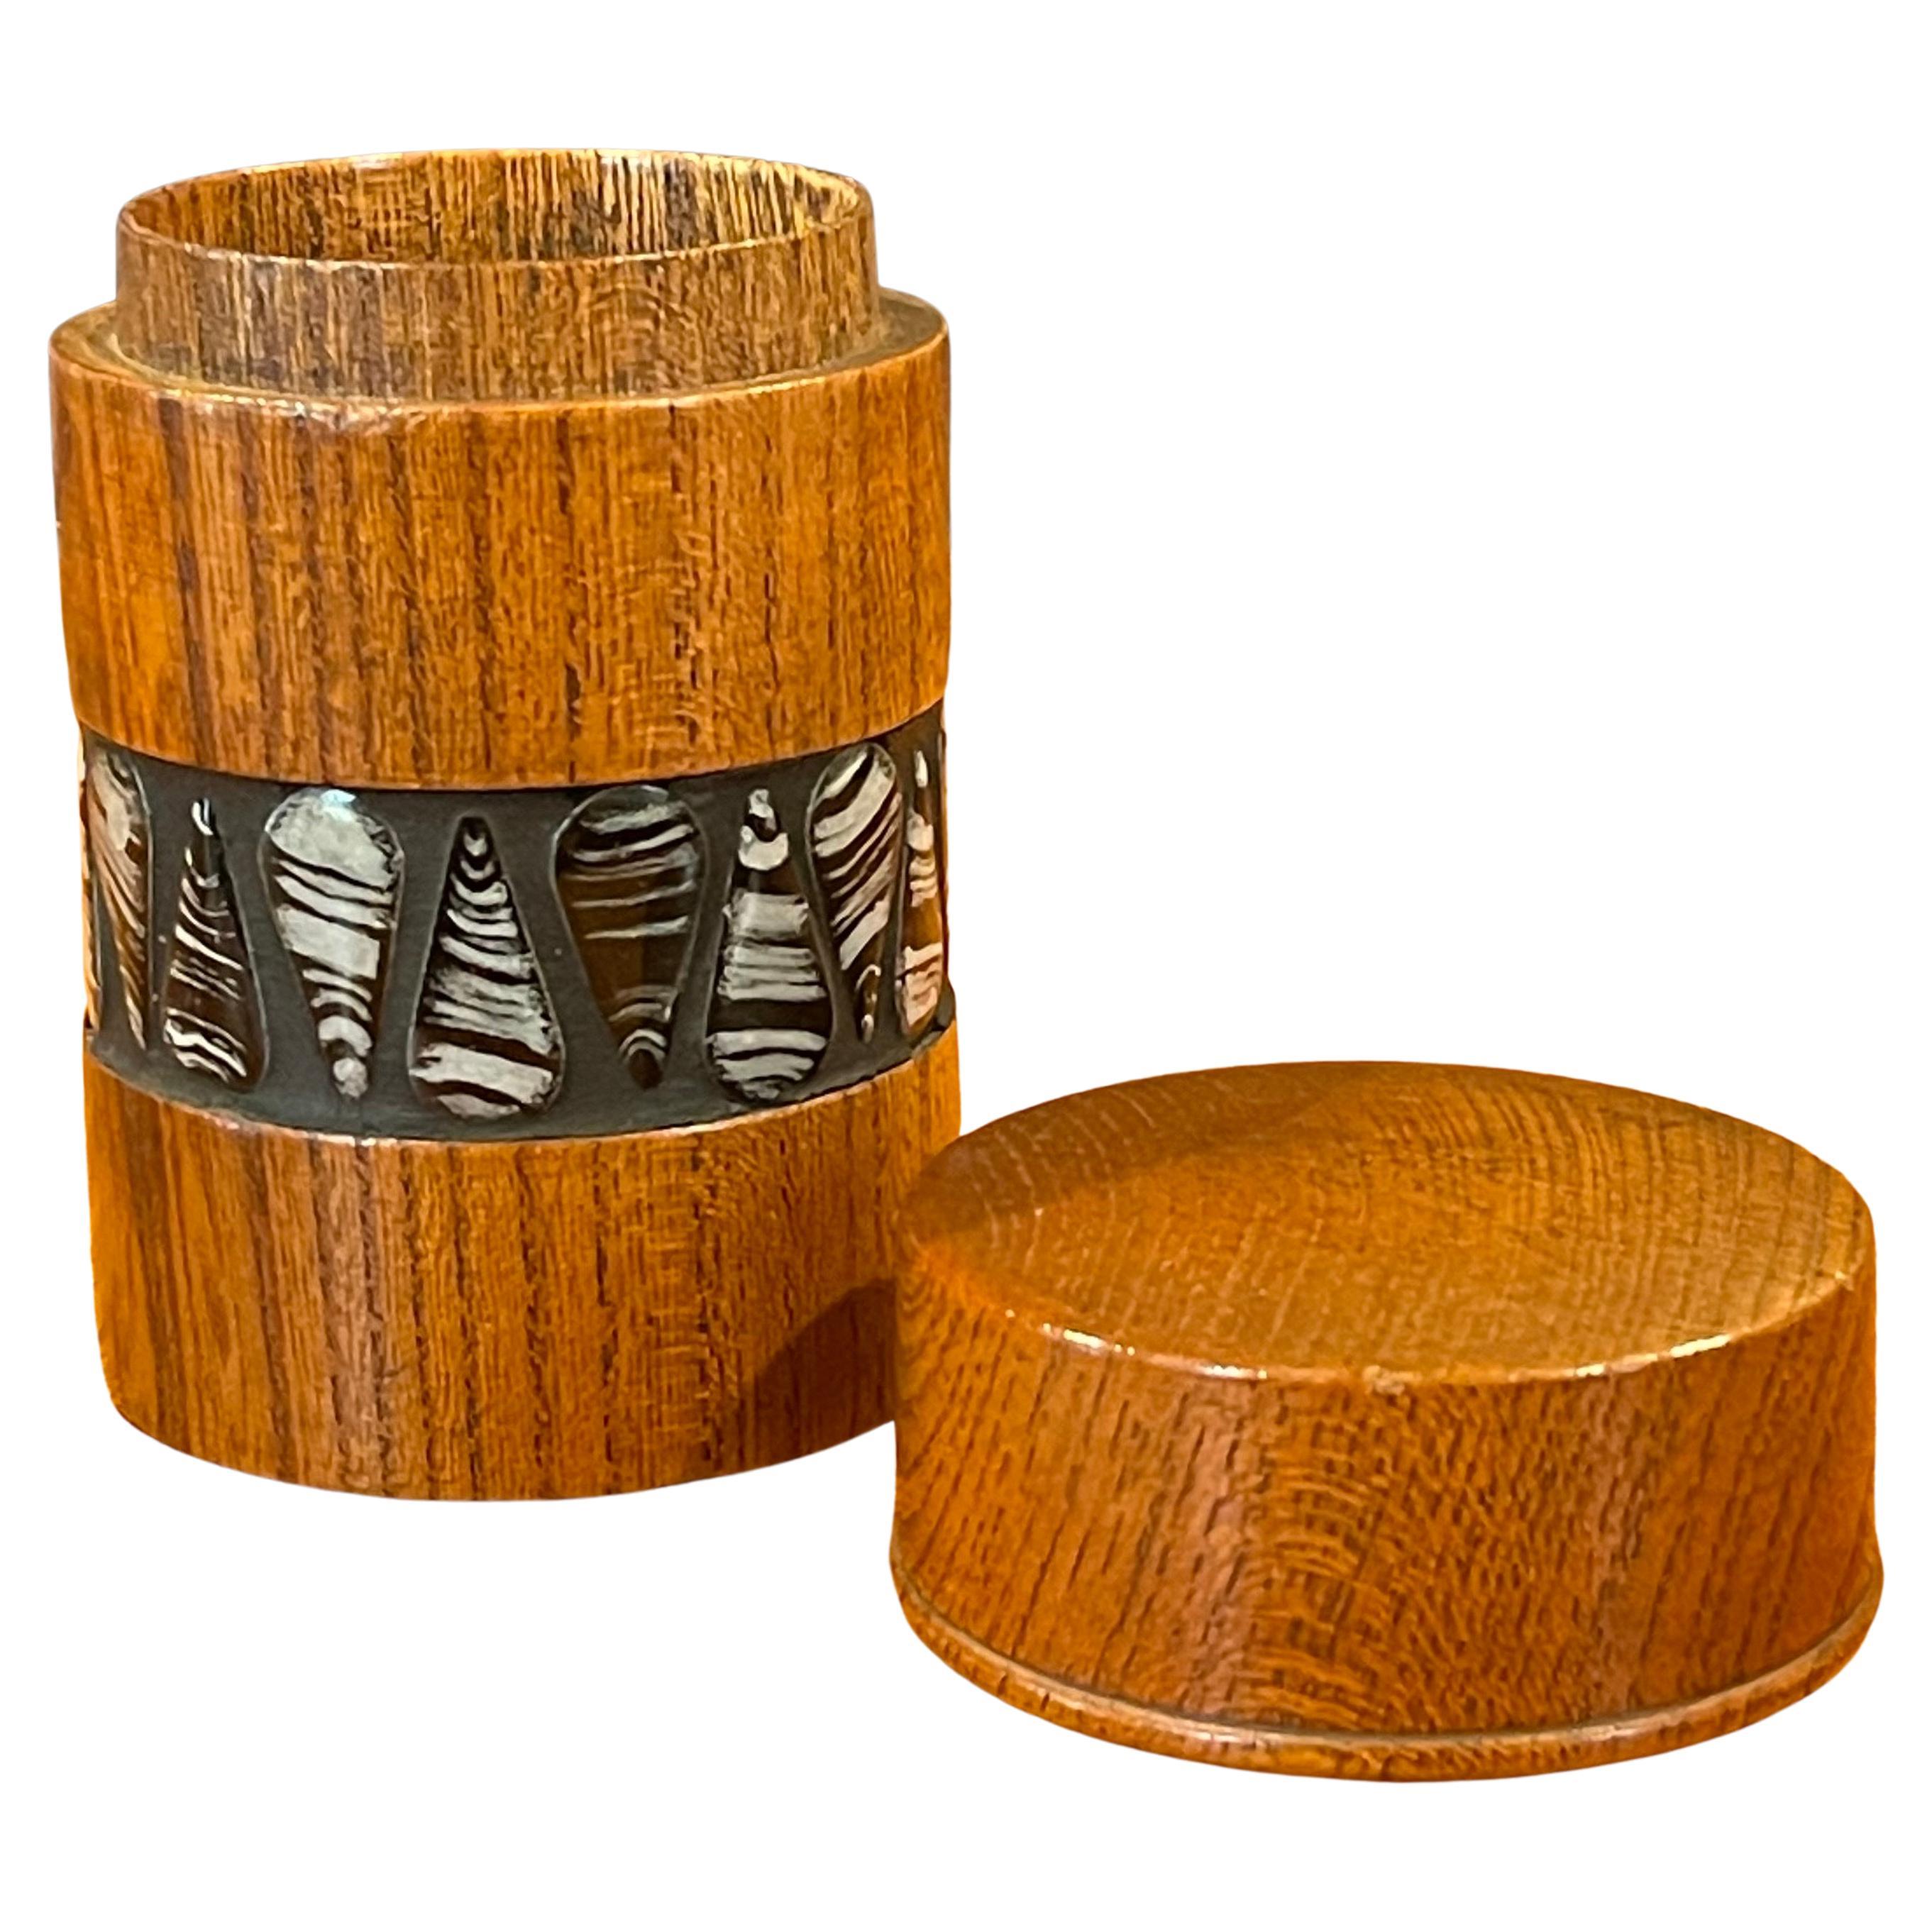 A pristine and absolutely gorgeous teak and ceramic lidded match box / container in the style of Sigvard Nilsson, circa 1950s. The box is made of solid teak wood with a very cool black and white ceramic tear drop band.  The piece is super rare and